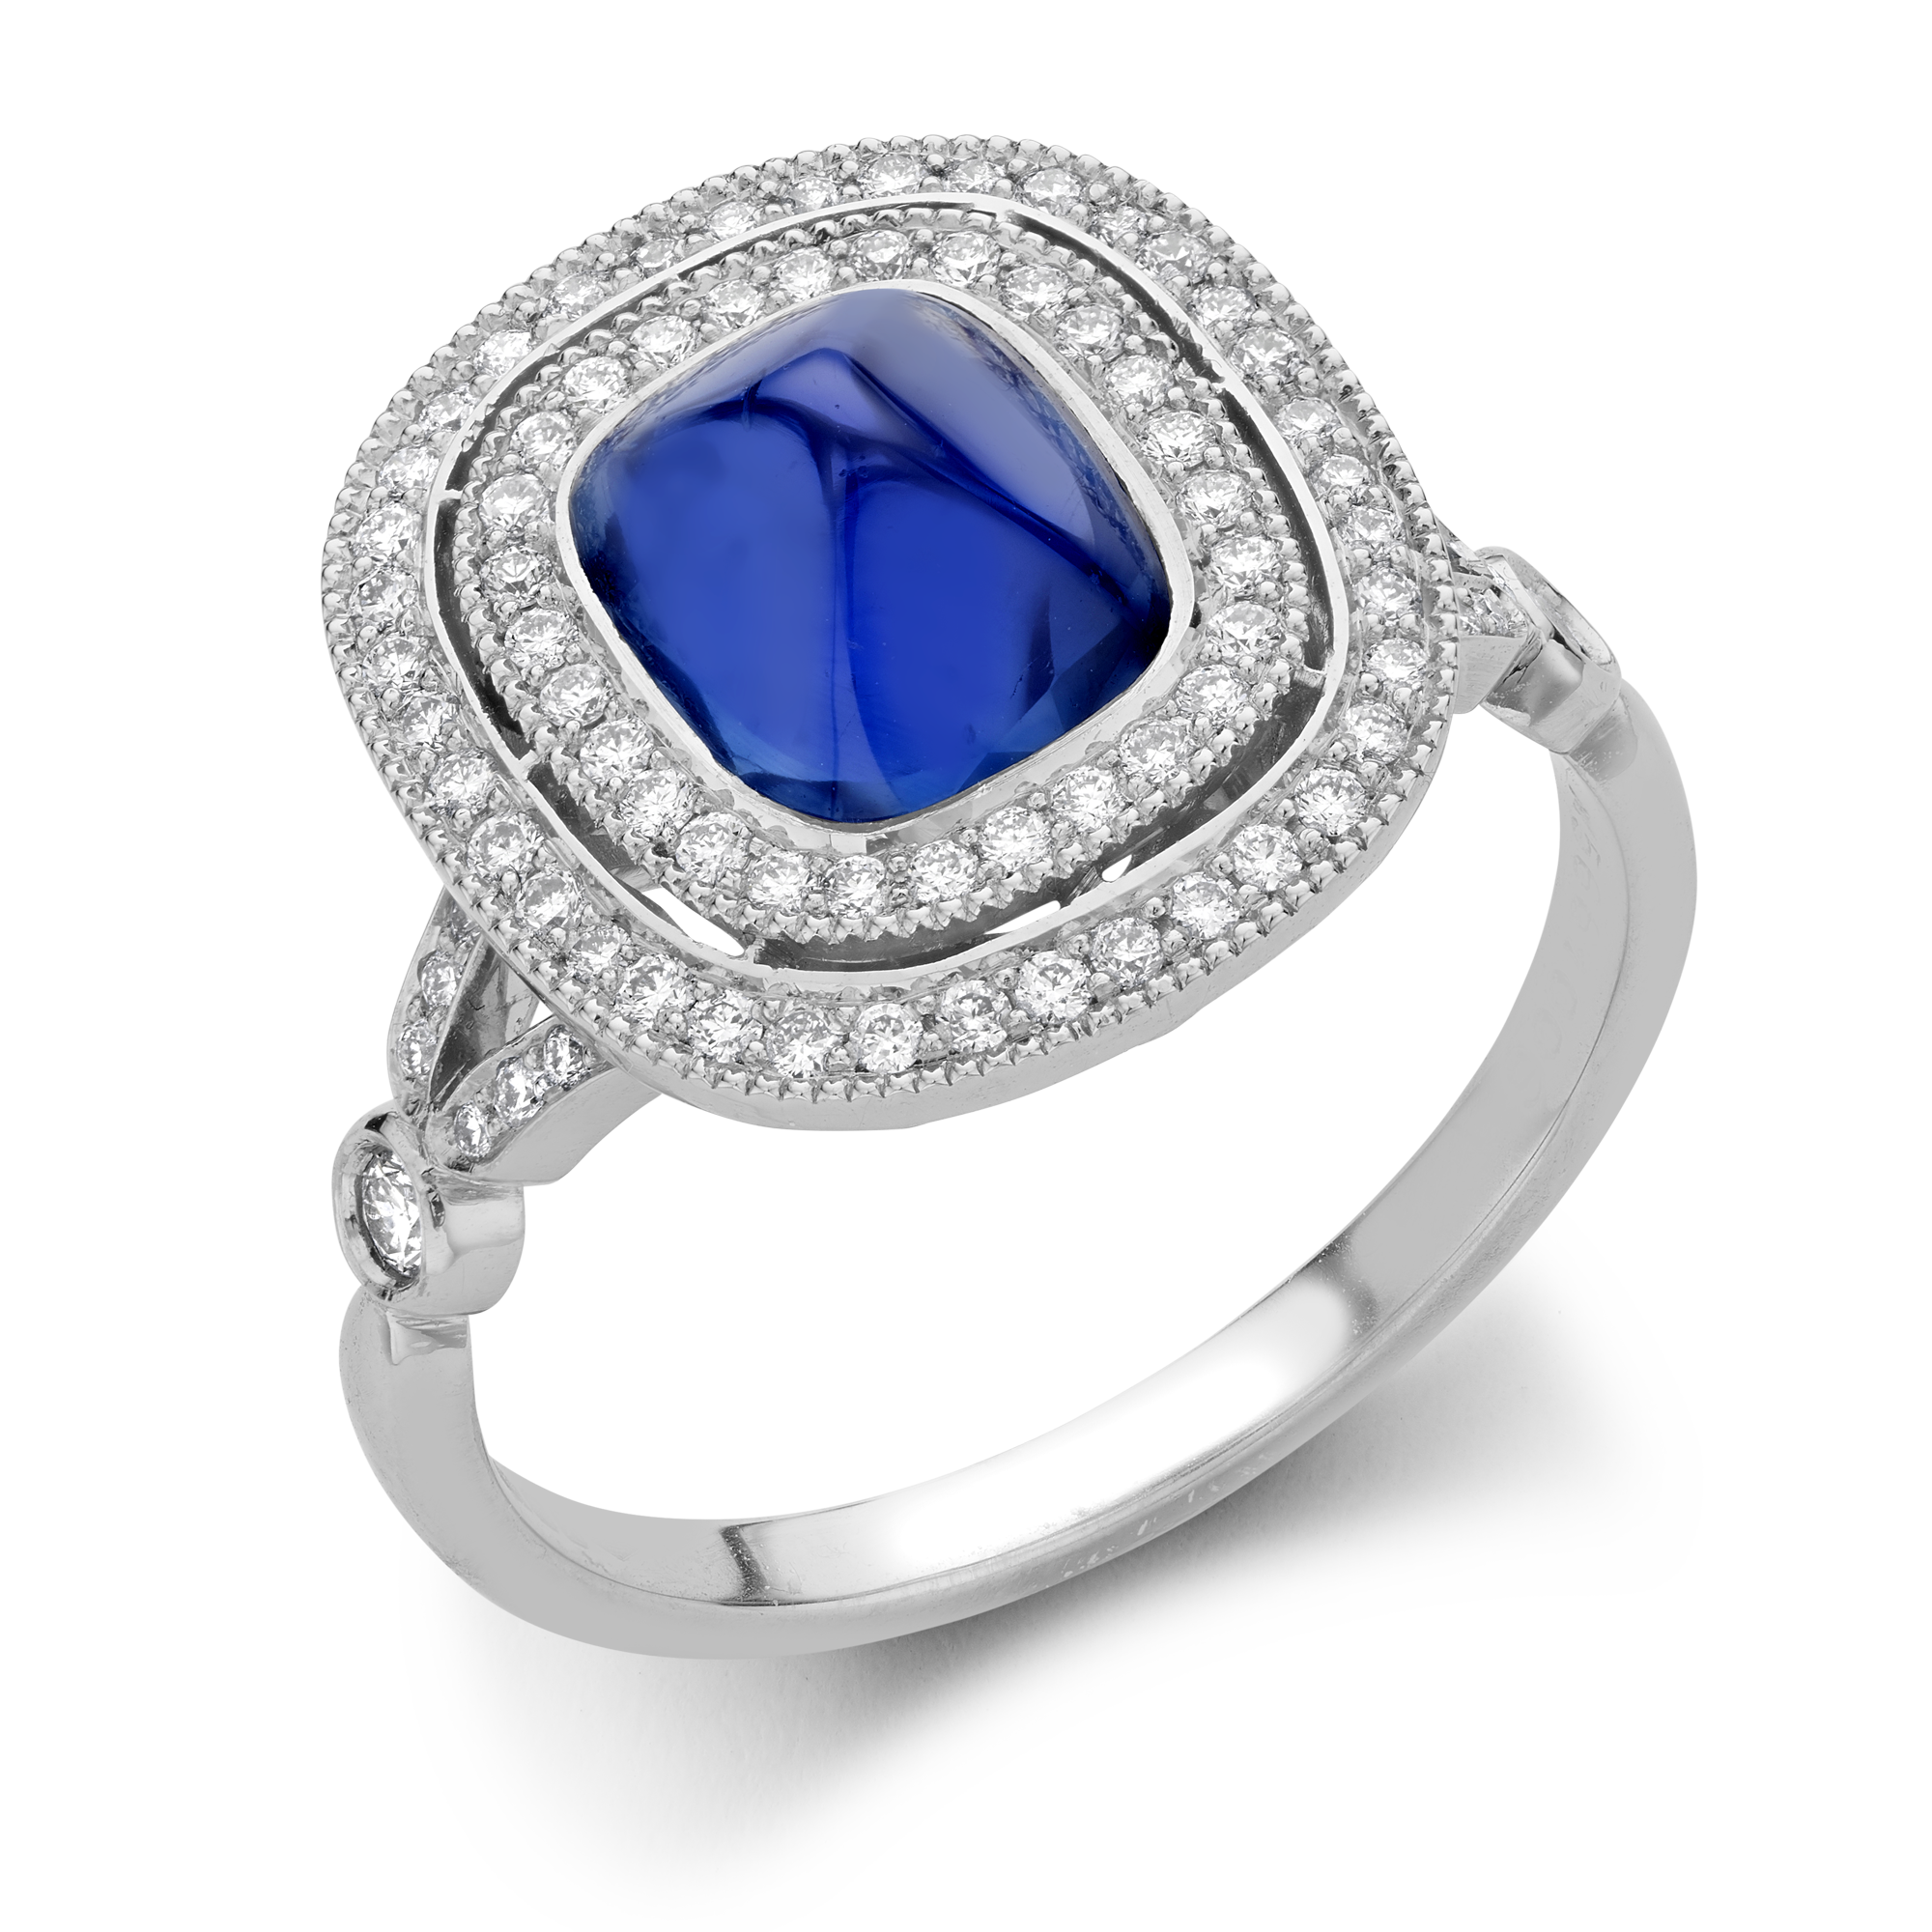 Palladium and 1.58ct oval cabochon cut star sapphire engagement ring